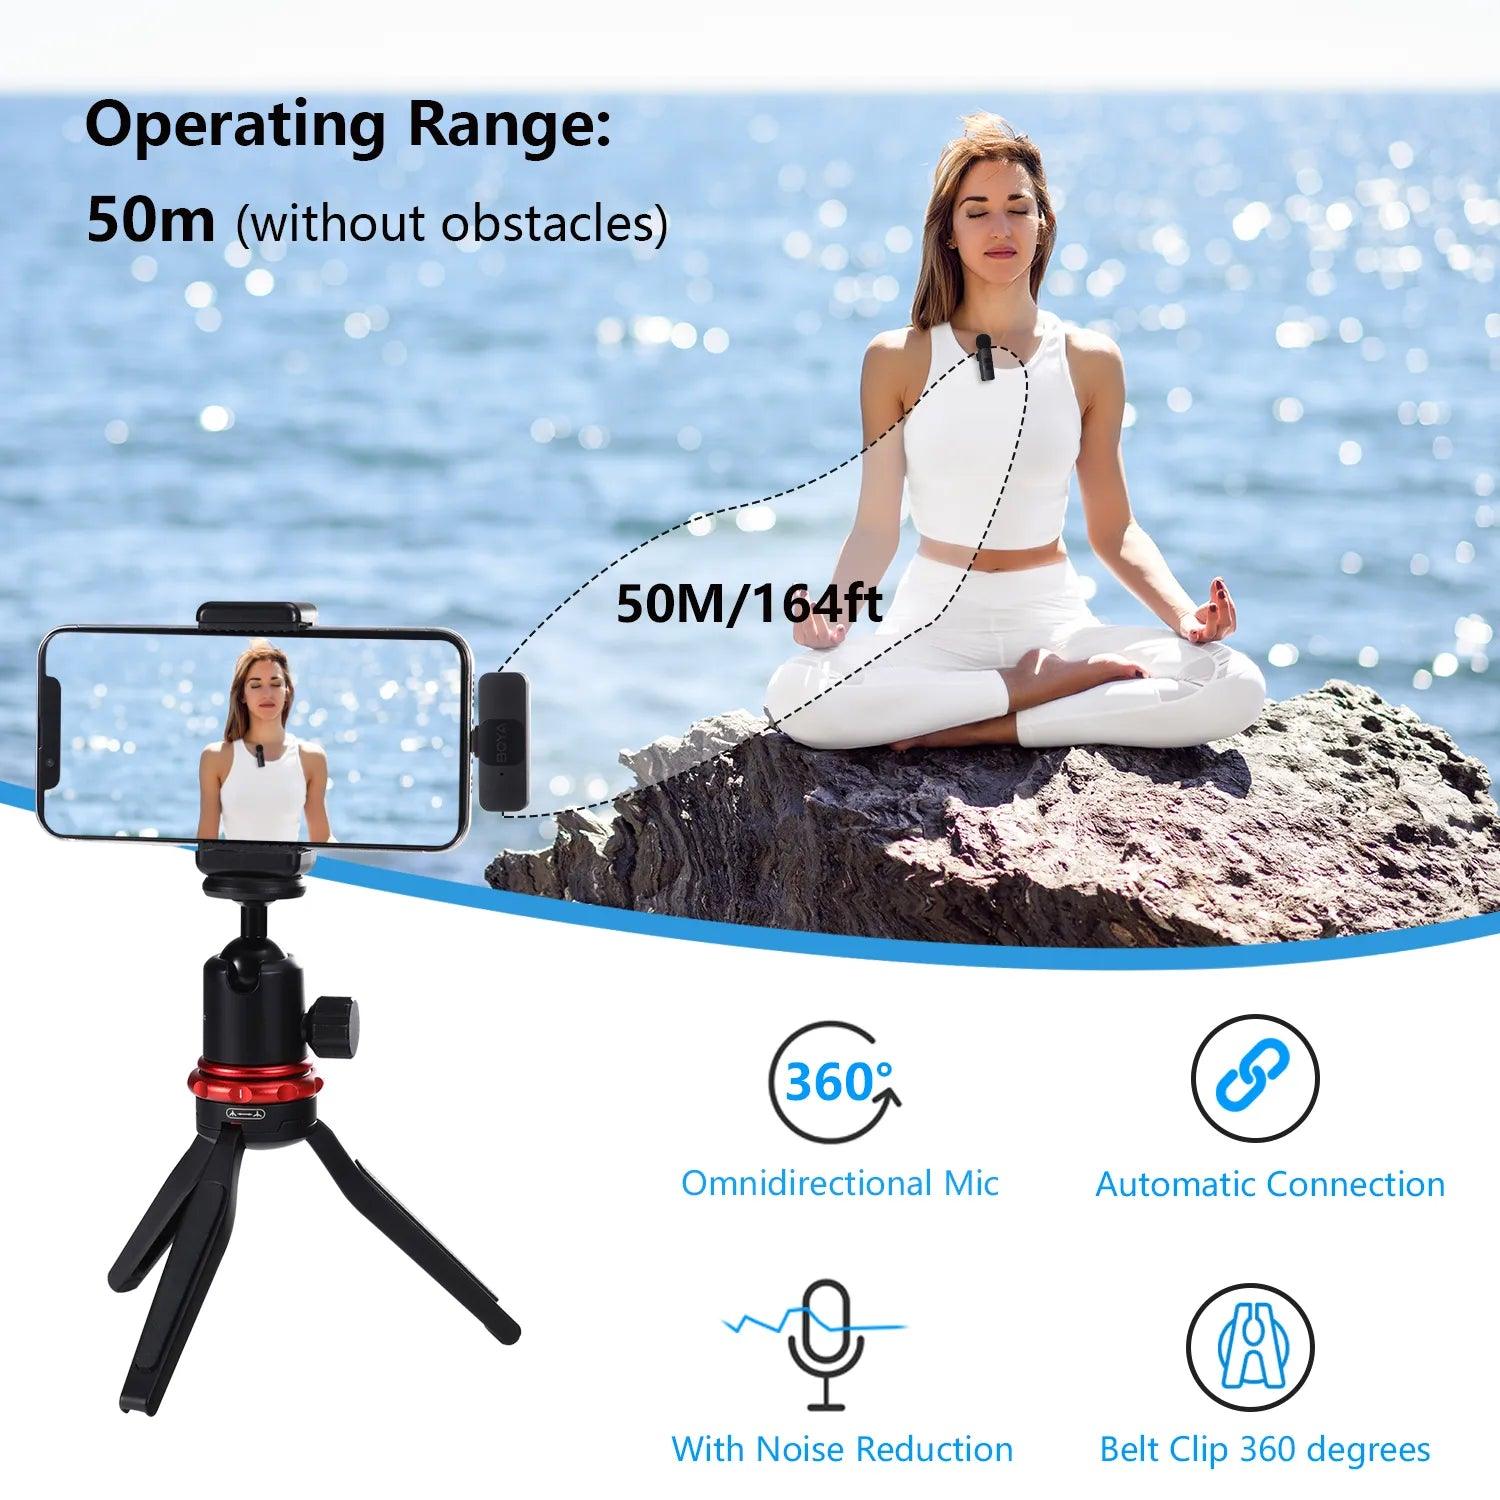 Professional Wireless Lavalier Microphone Kit for iOS and Android Devices  ourlum.com   